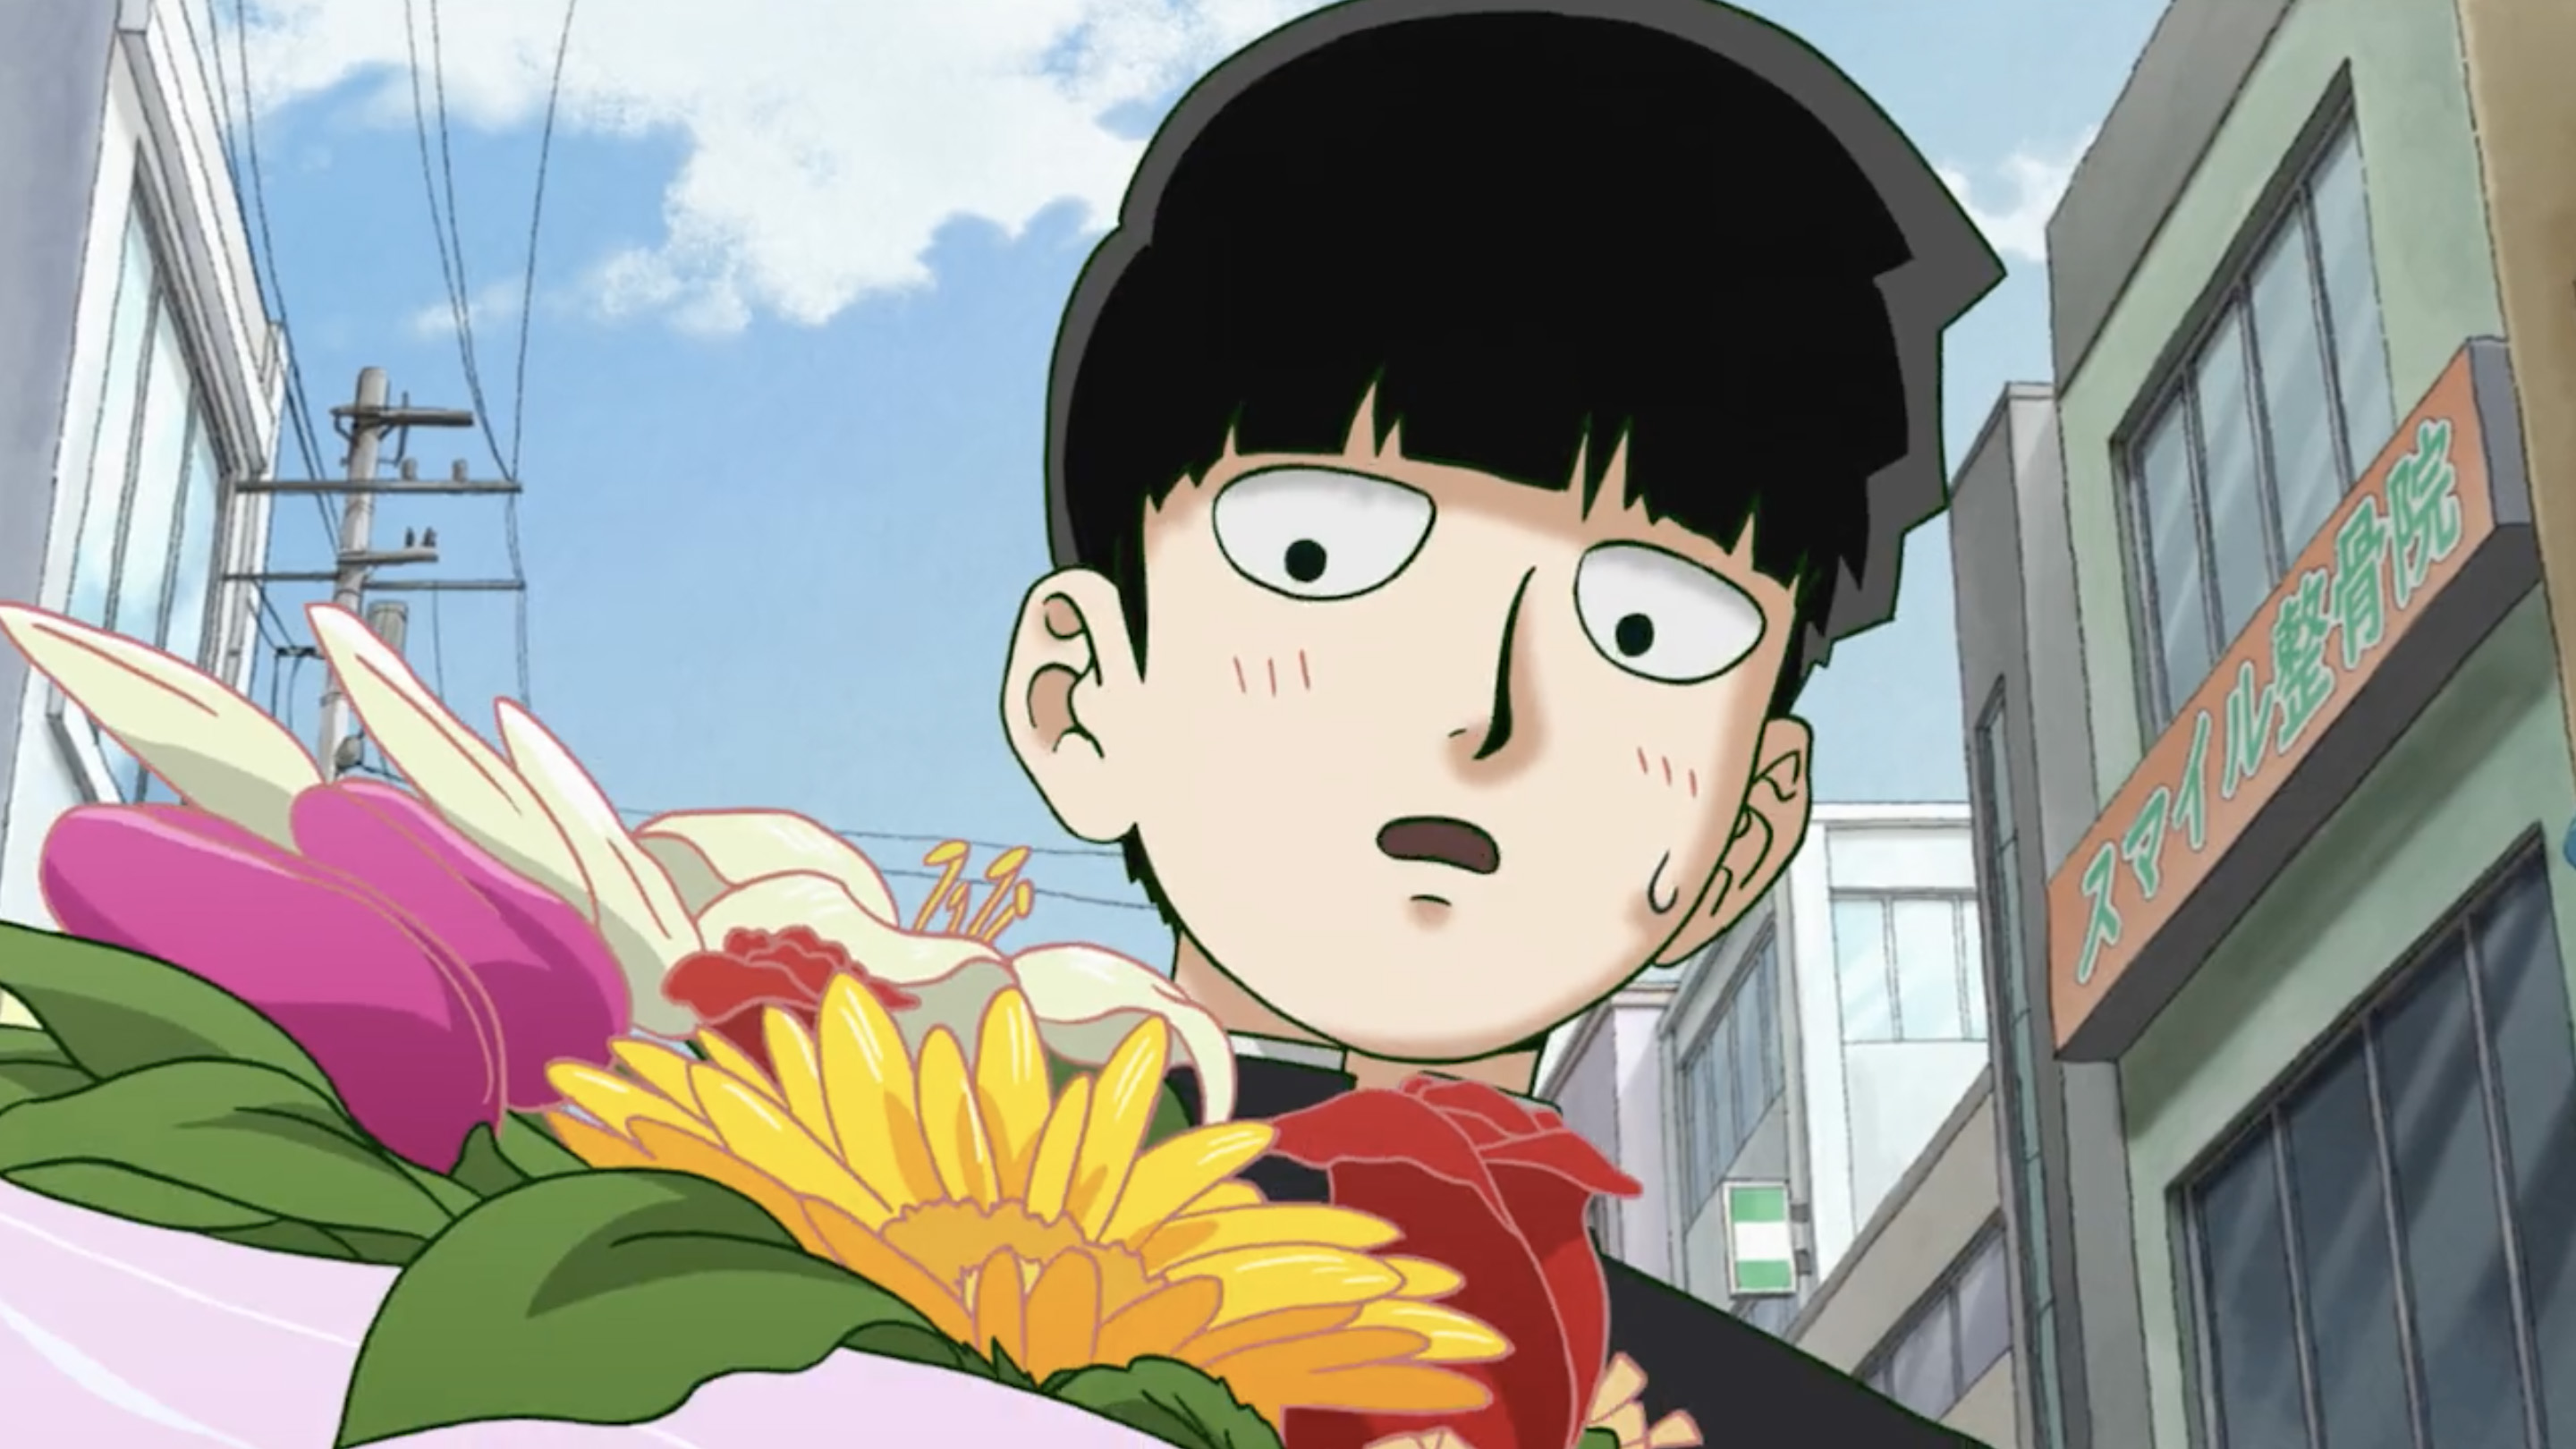 Mob Psycho 100 III Releases New Trailer Ahead of October 5 Premiere